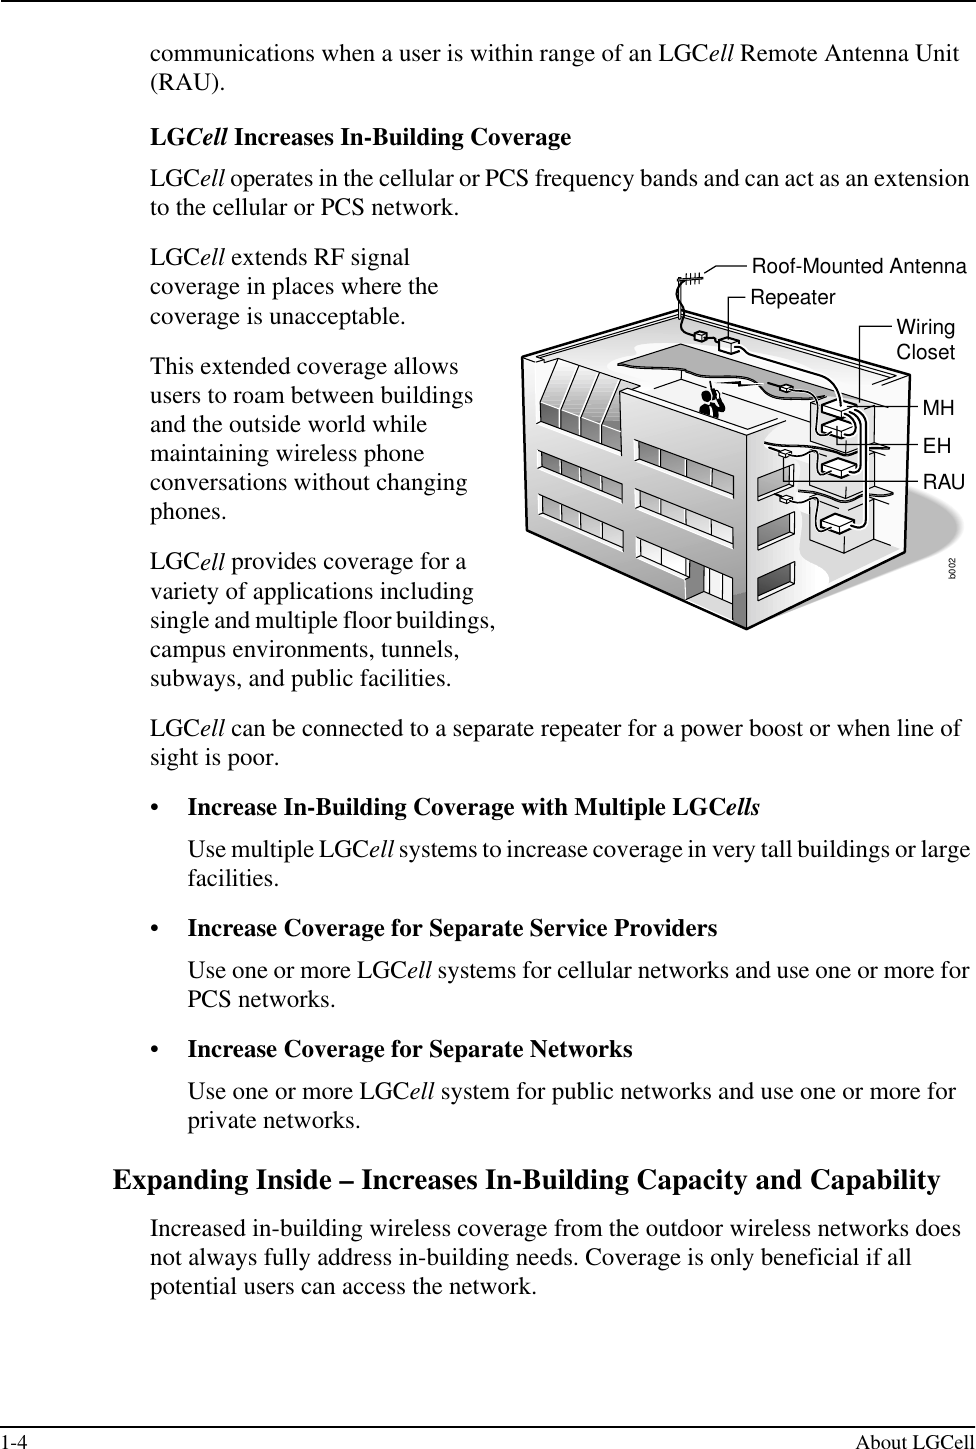 1-4 About LGCellcommunications when a user is within range of an LGCell Remote Antenna Unit (RAU).LGCell Increases In-Building CoverageLGCell operates in the cellular or PCS frequency bands and can act as an extension to the cellular or PCS network.LGCell extends RF signal coverage in places where the coverage is unacceptable.This extended coverage allows users to roam between buildings and the outside world while maintaining wireless phone conversations without changing phones.LGCell provides coverage for a variety of applications including single and multiple floor buildings, campus environments, tunnels, subways, and public facilities.LGCell can be connected to a separate repeater for a power boost or when line of sight is poor.•Increase In-Building Coverage with Multiple LGCellsUse multiple LGCell systems to increase coverage in very tall buildings or large facilities.•Increase Coverage for Separate Service ProvidersUse one or more LGCell systems for cellular networks and use one or more for PCS networks.•Increase Coverage for Separate NetworksUse one or more LGCell system for public networks and use one or more for private networks.Expanding Inside – Increases In-Building Capacity and CapabilityIncreased in-building wireless coverage from the outdoor wireless networks does not always fully address in-building needs. Coverage is only beneficial if all potential users can access the network.b002Roof-Mounted AntennaRepeaterWiringClosetMHEHRAU